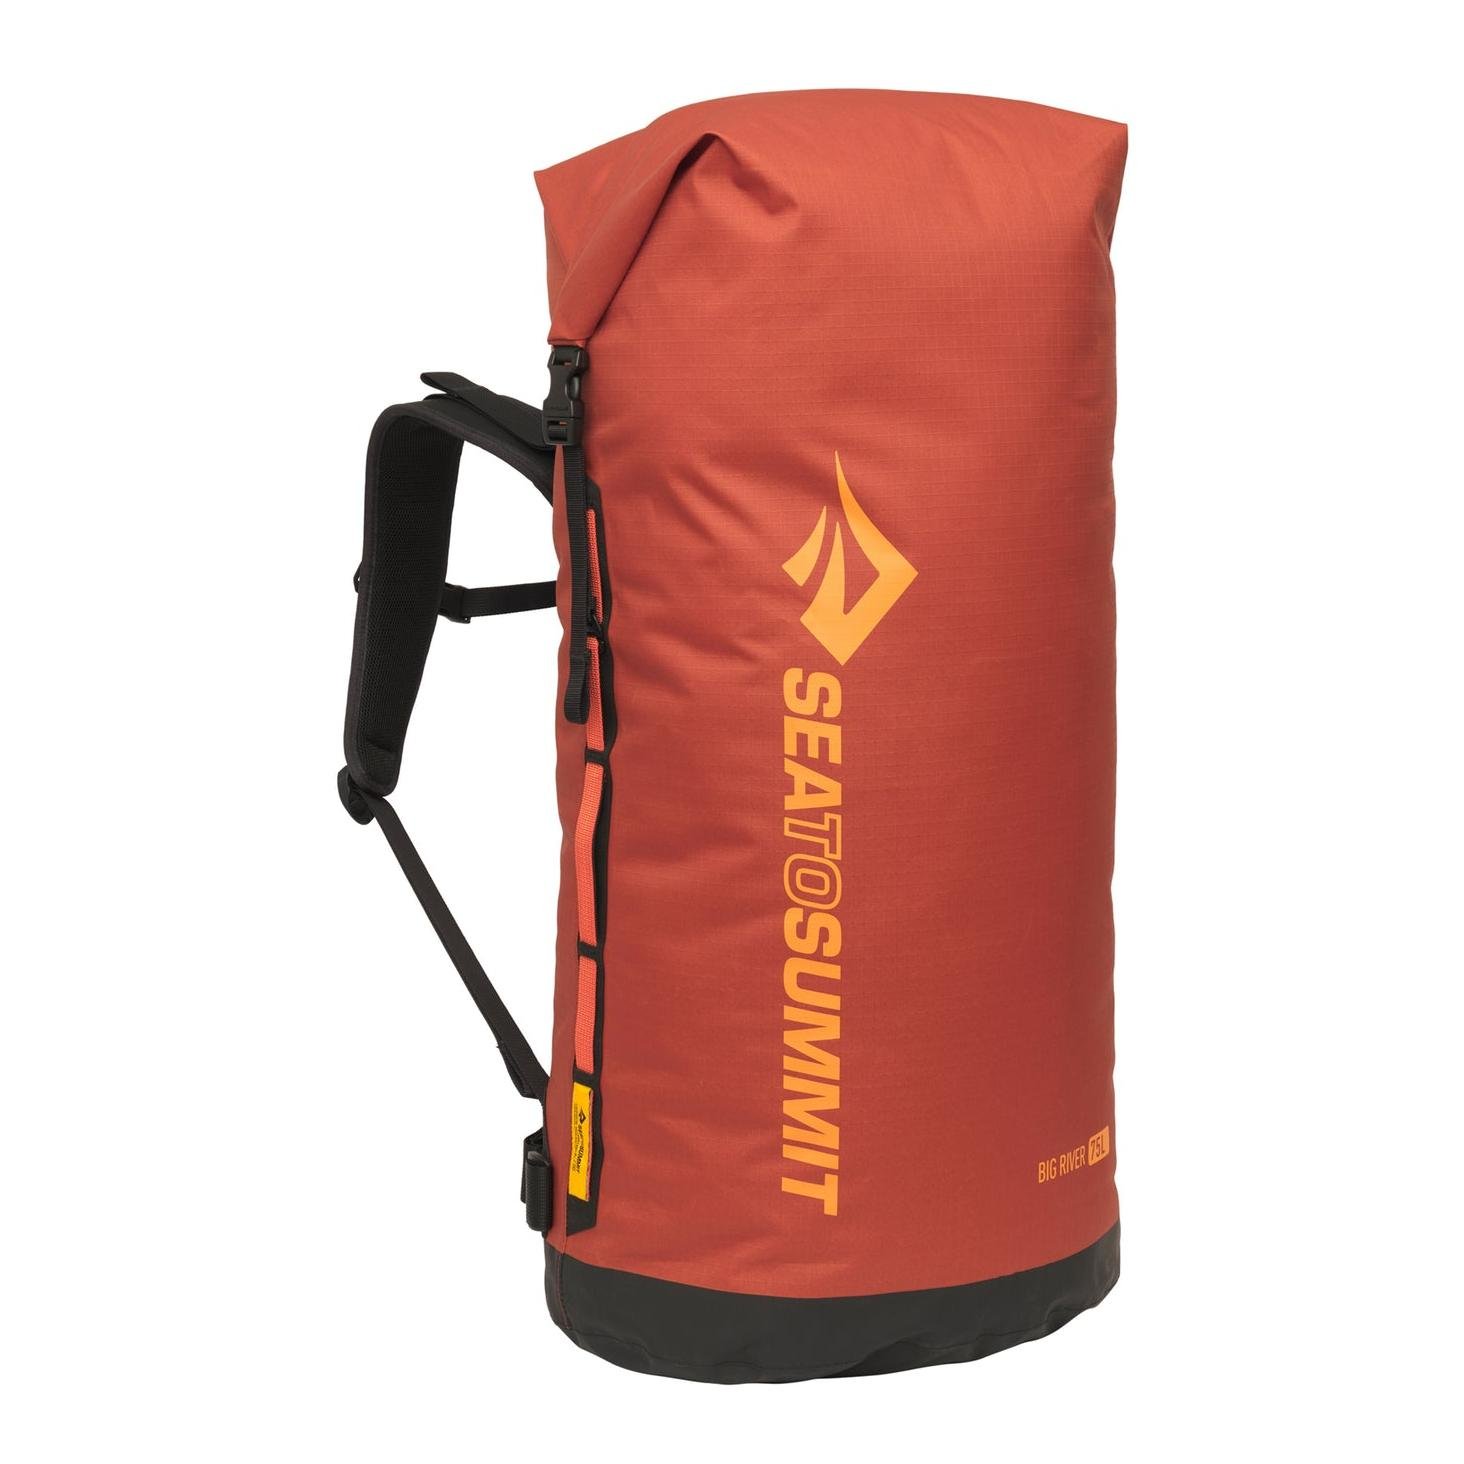 Sea to Summit Big River Dry Backpack